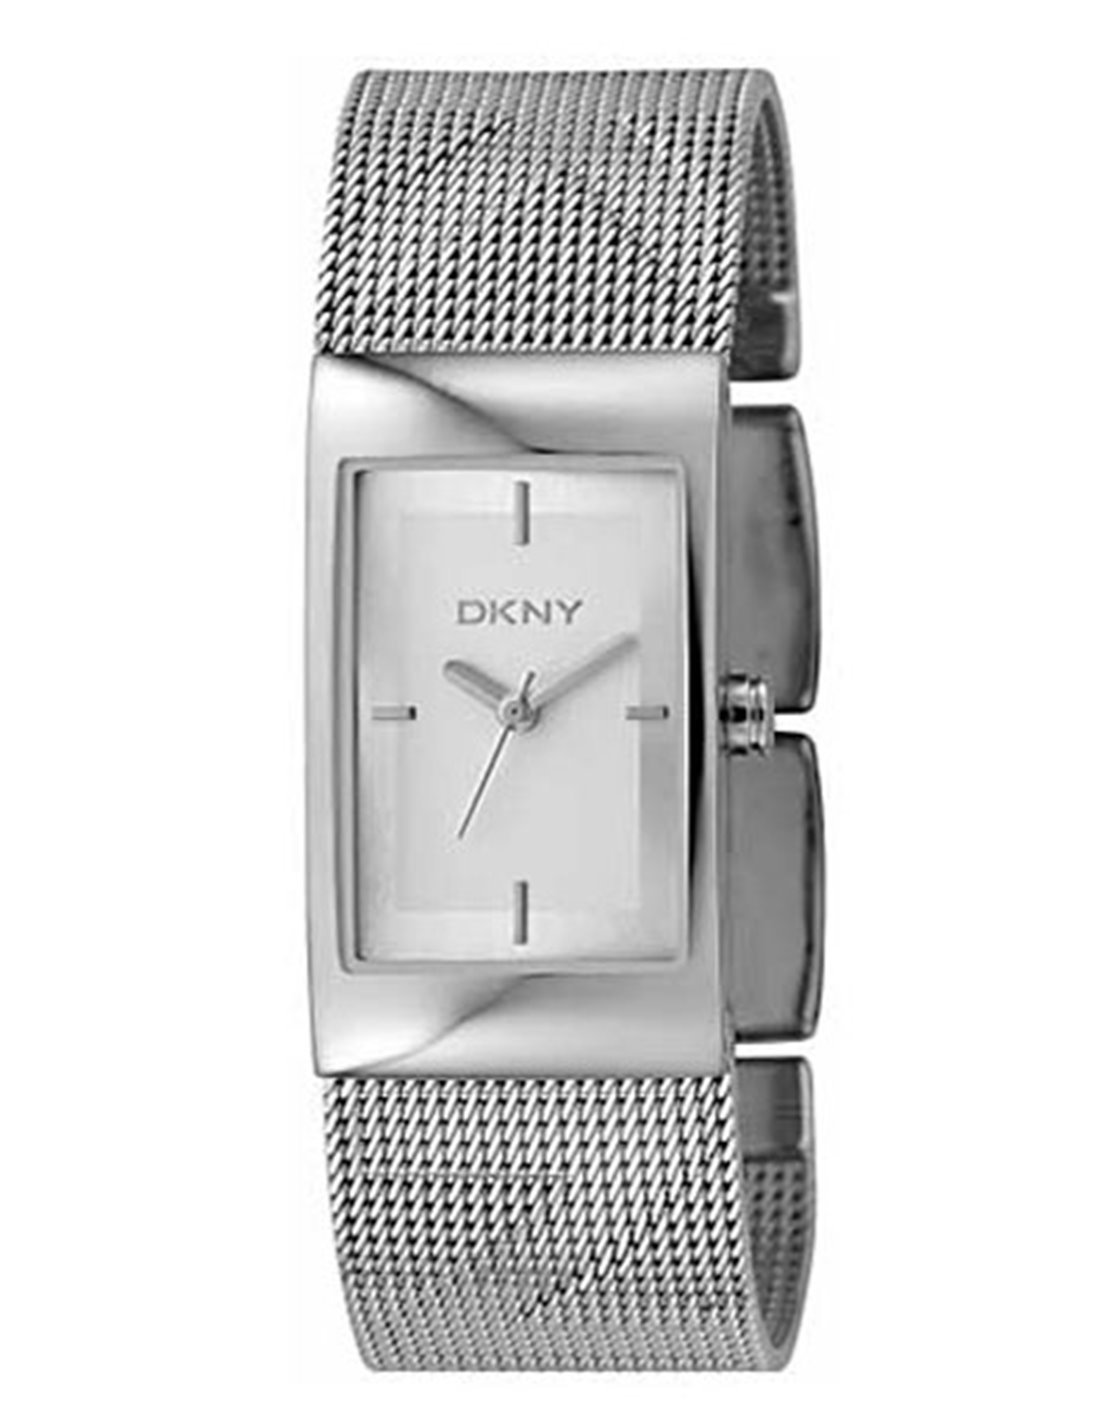 The dkny watches high end collection for a lifetime by Darveys - Issuu-happymobile.vn